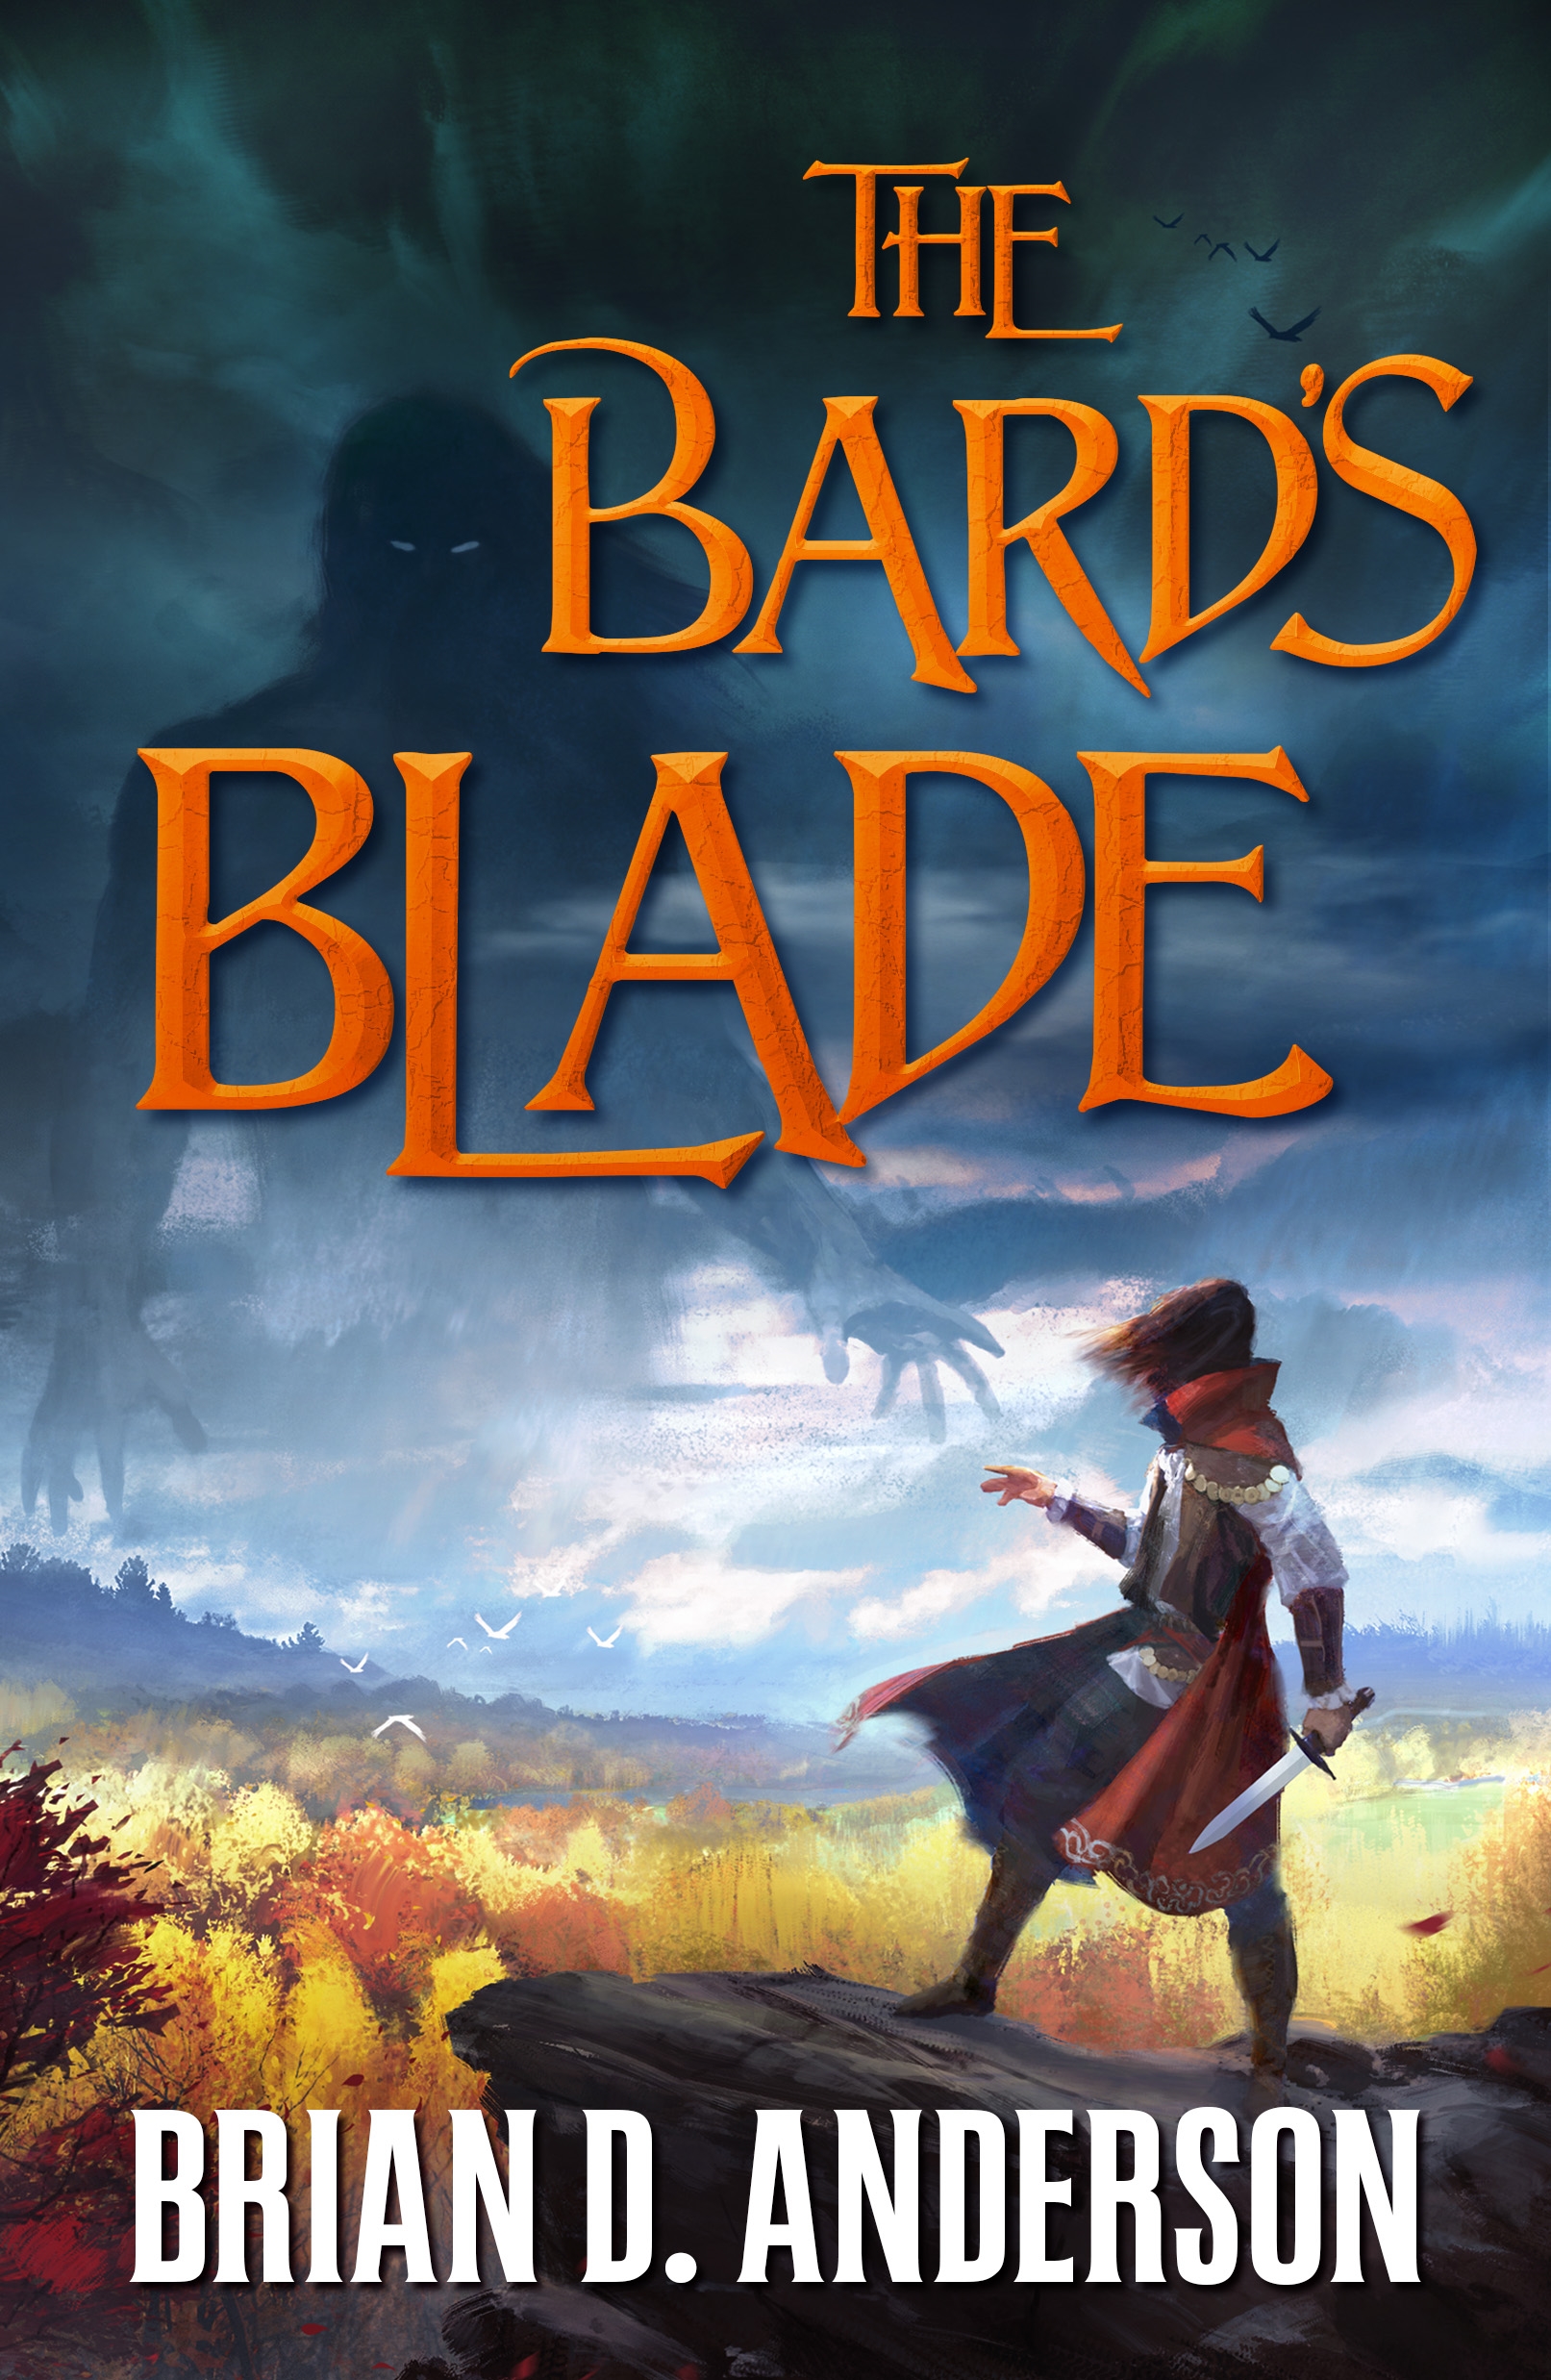 The Bard's Blade by Brian D. Anderson